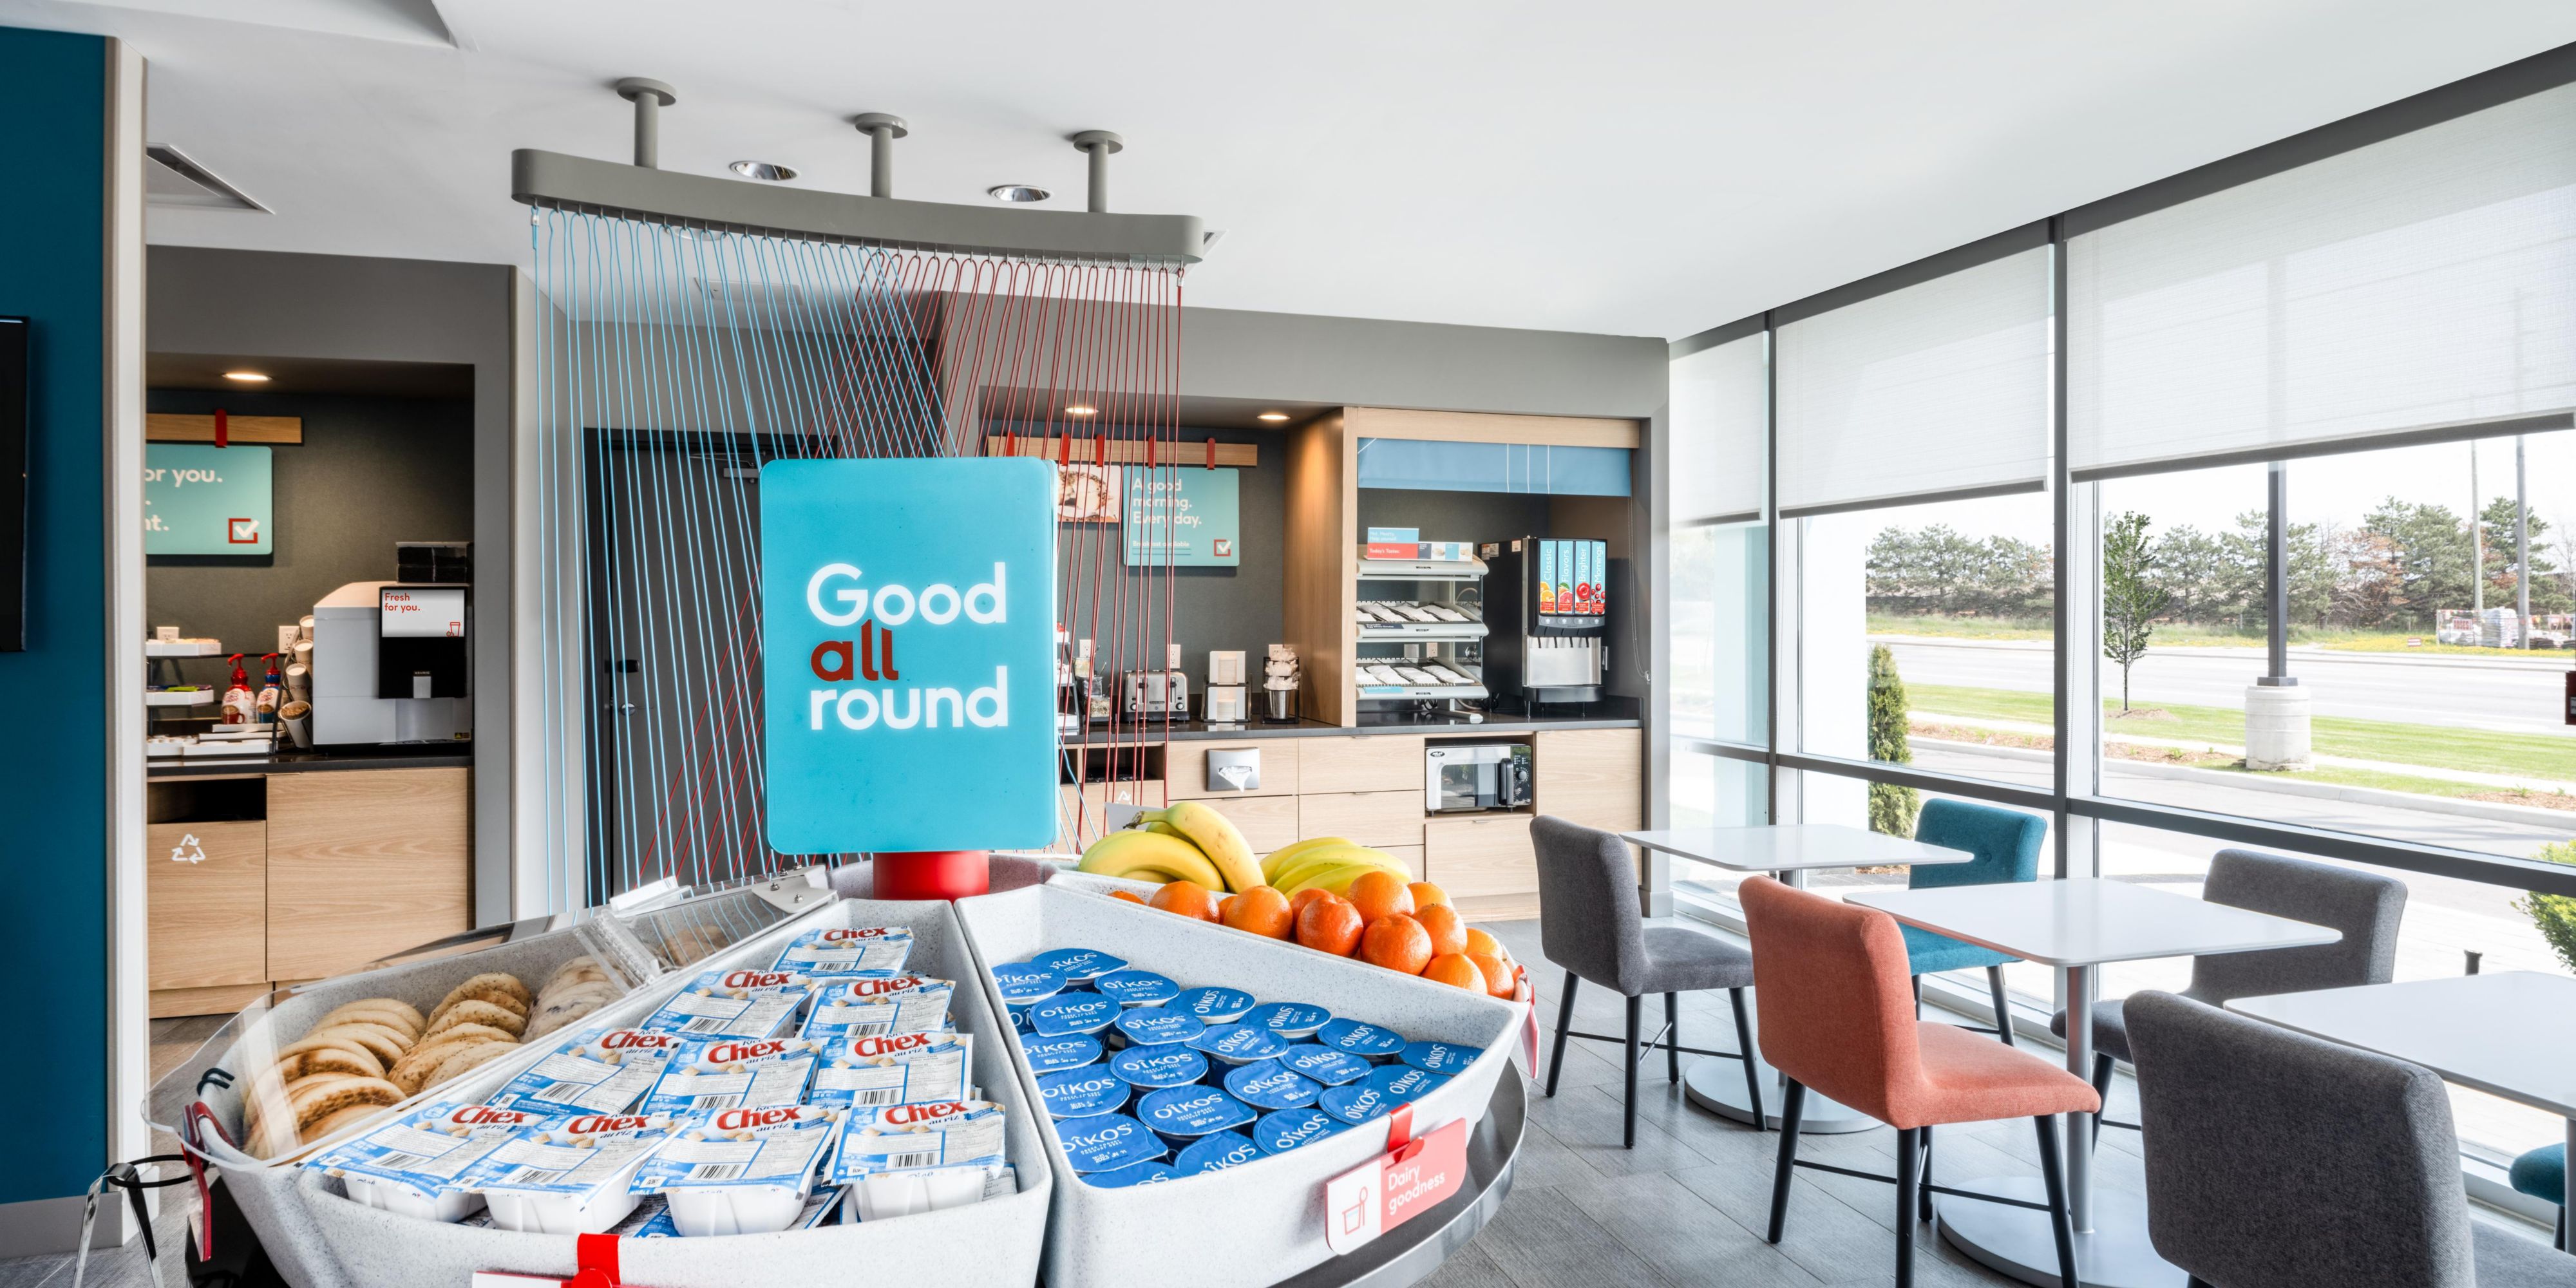 After a good night's sleep, fill up on our free, high-quality breakfast. We offer a variety of grab-and-go options, including rotating hot items.